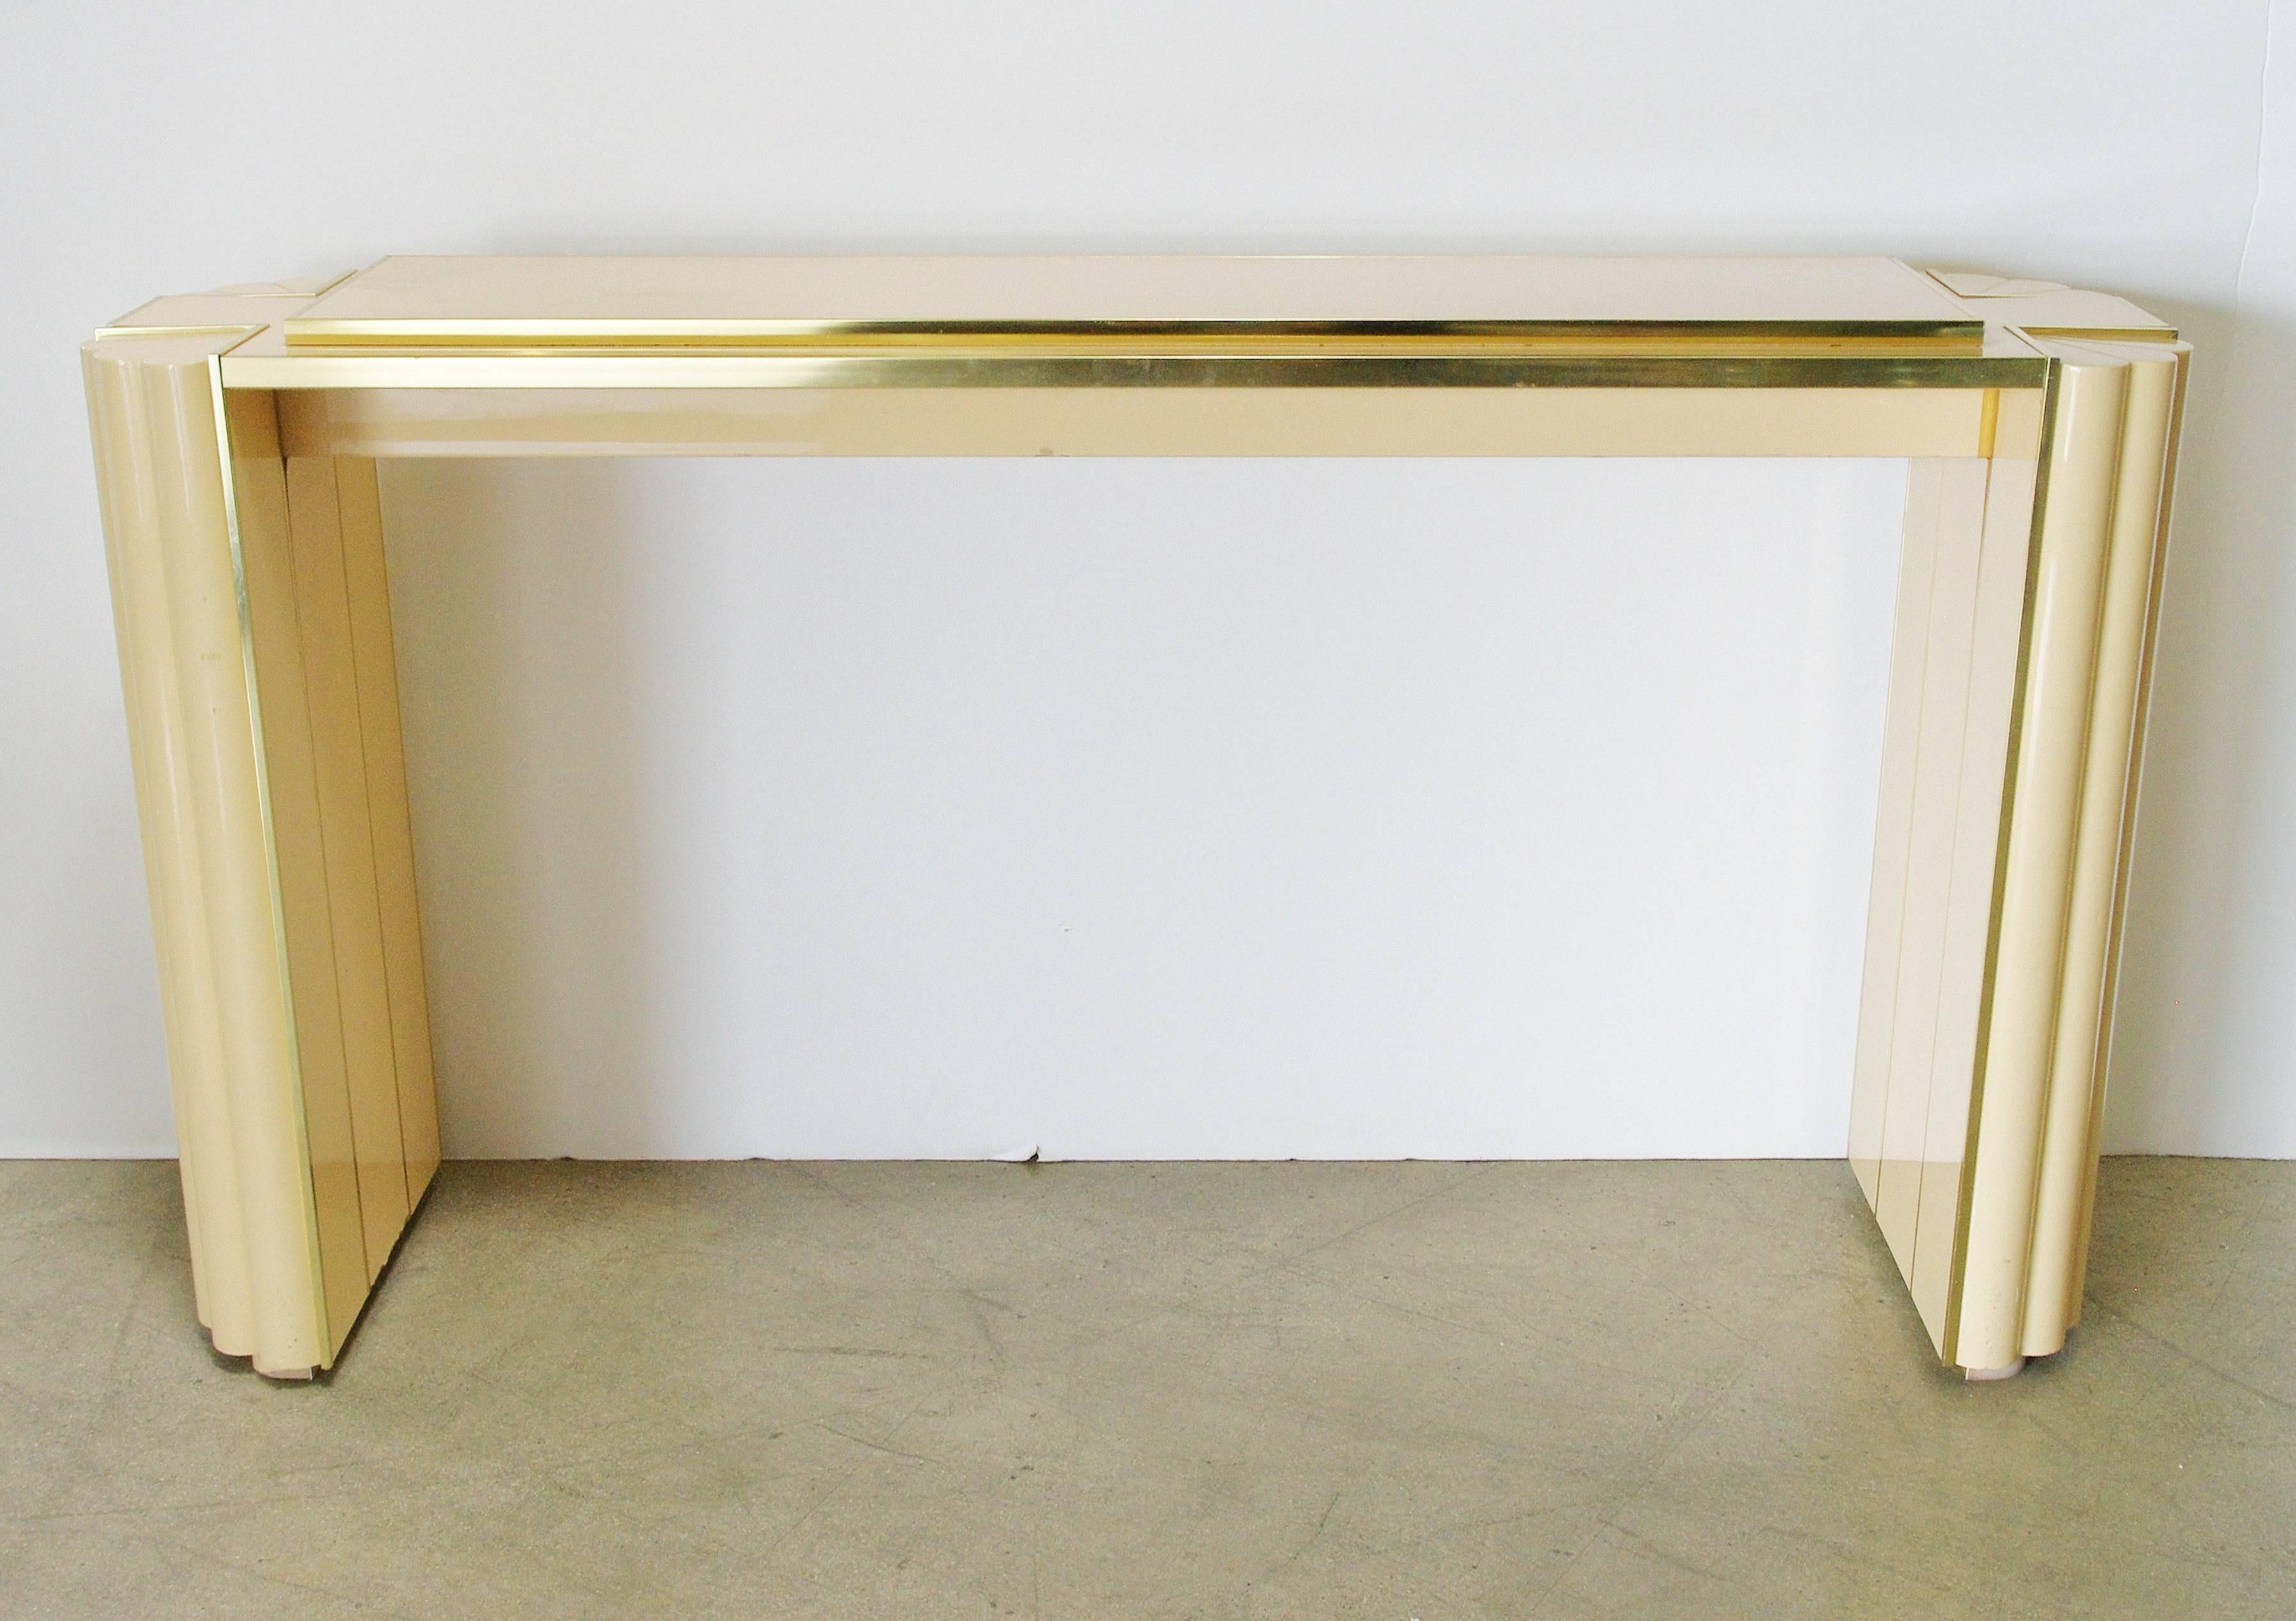 French Lacquered Console Table by Alain Delon for Maison Jansen